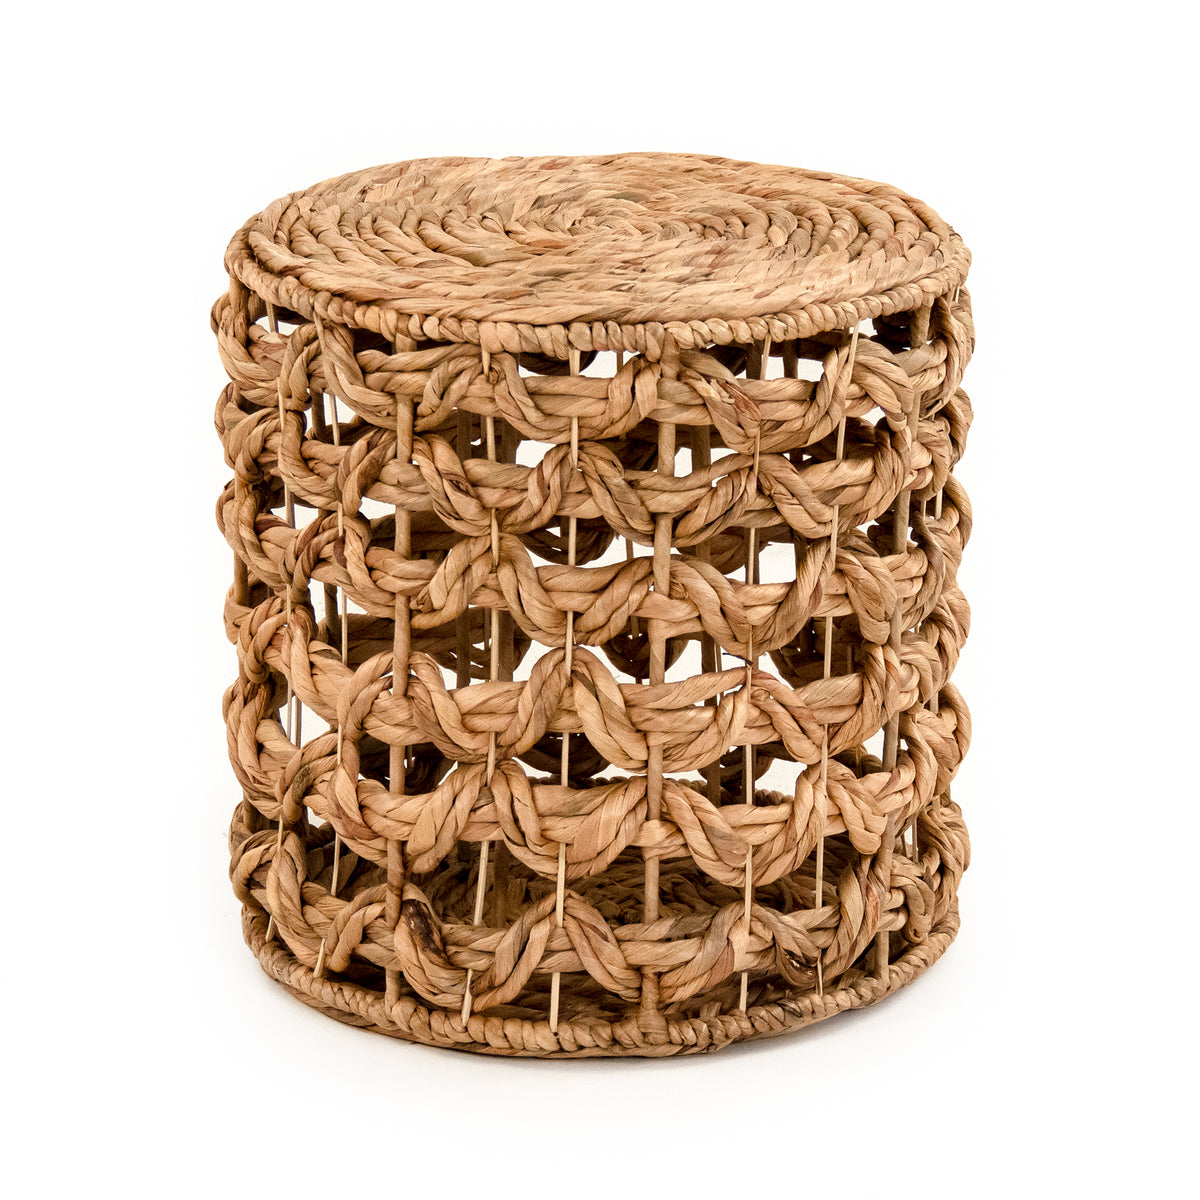 Woven Stool by Zentique